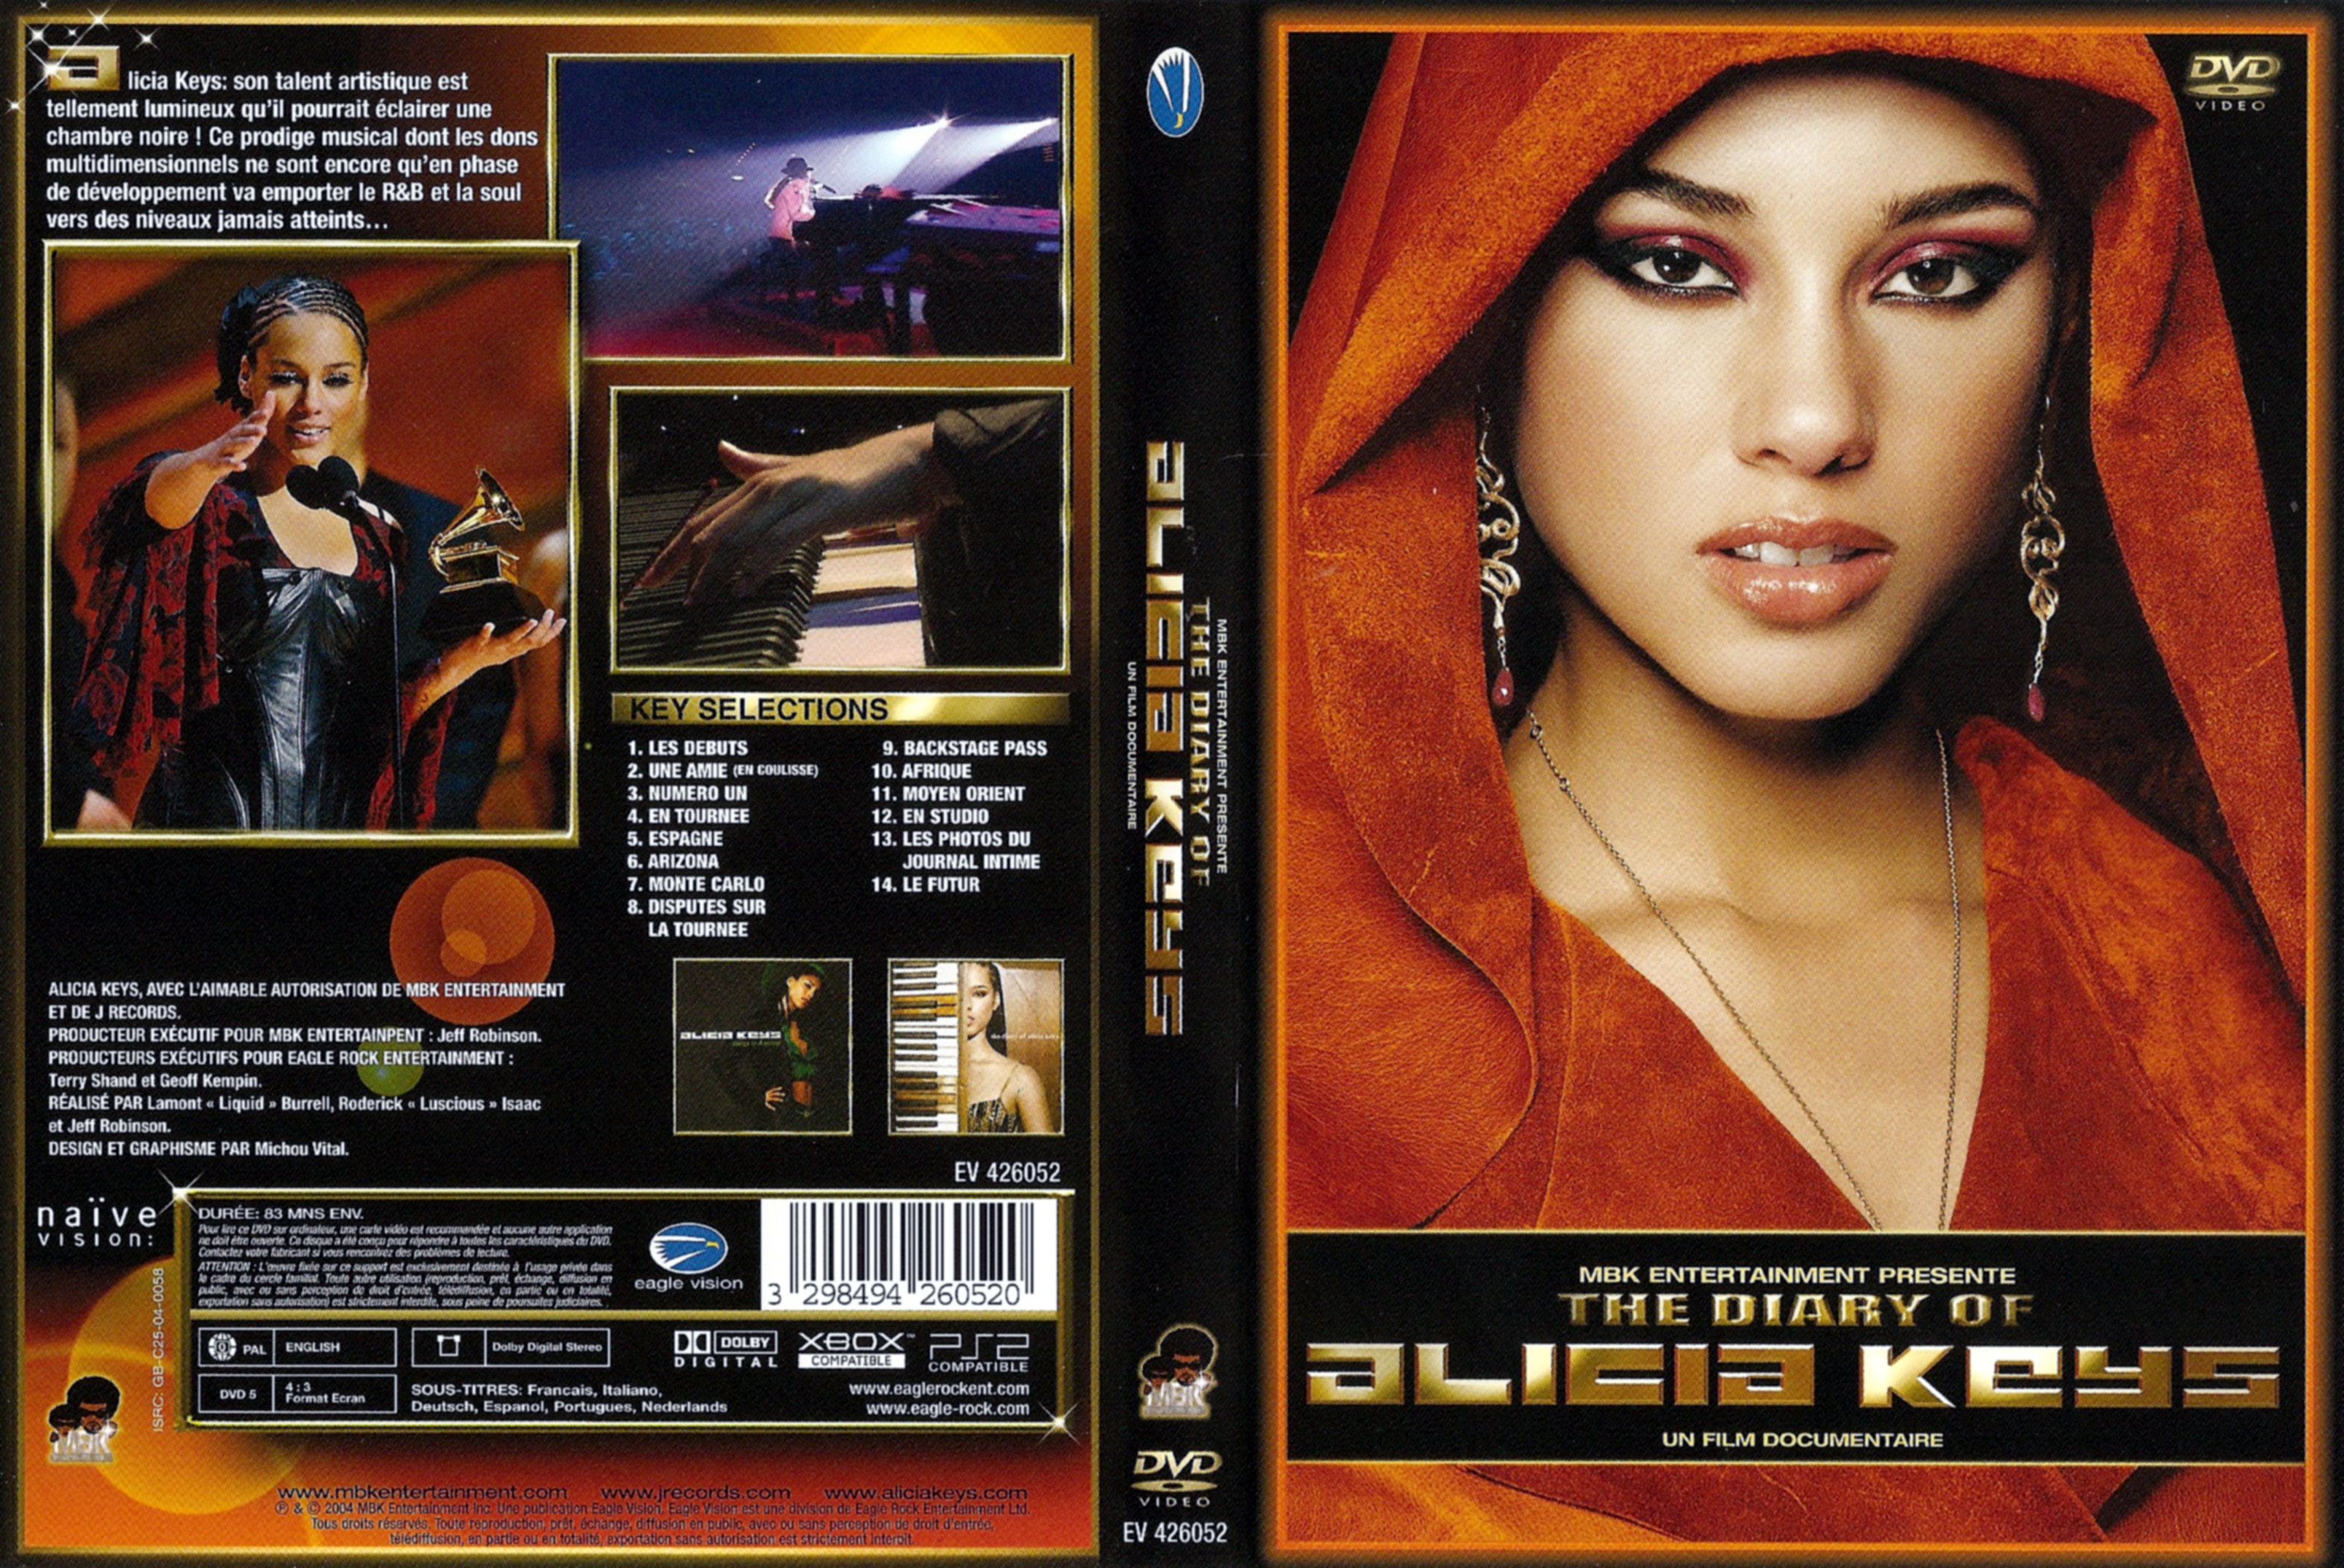 Jaquette DVD The diary of Alicia Keys